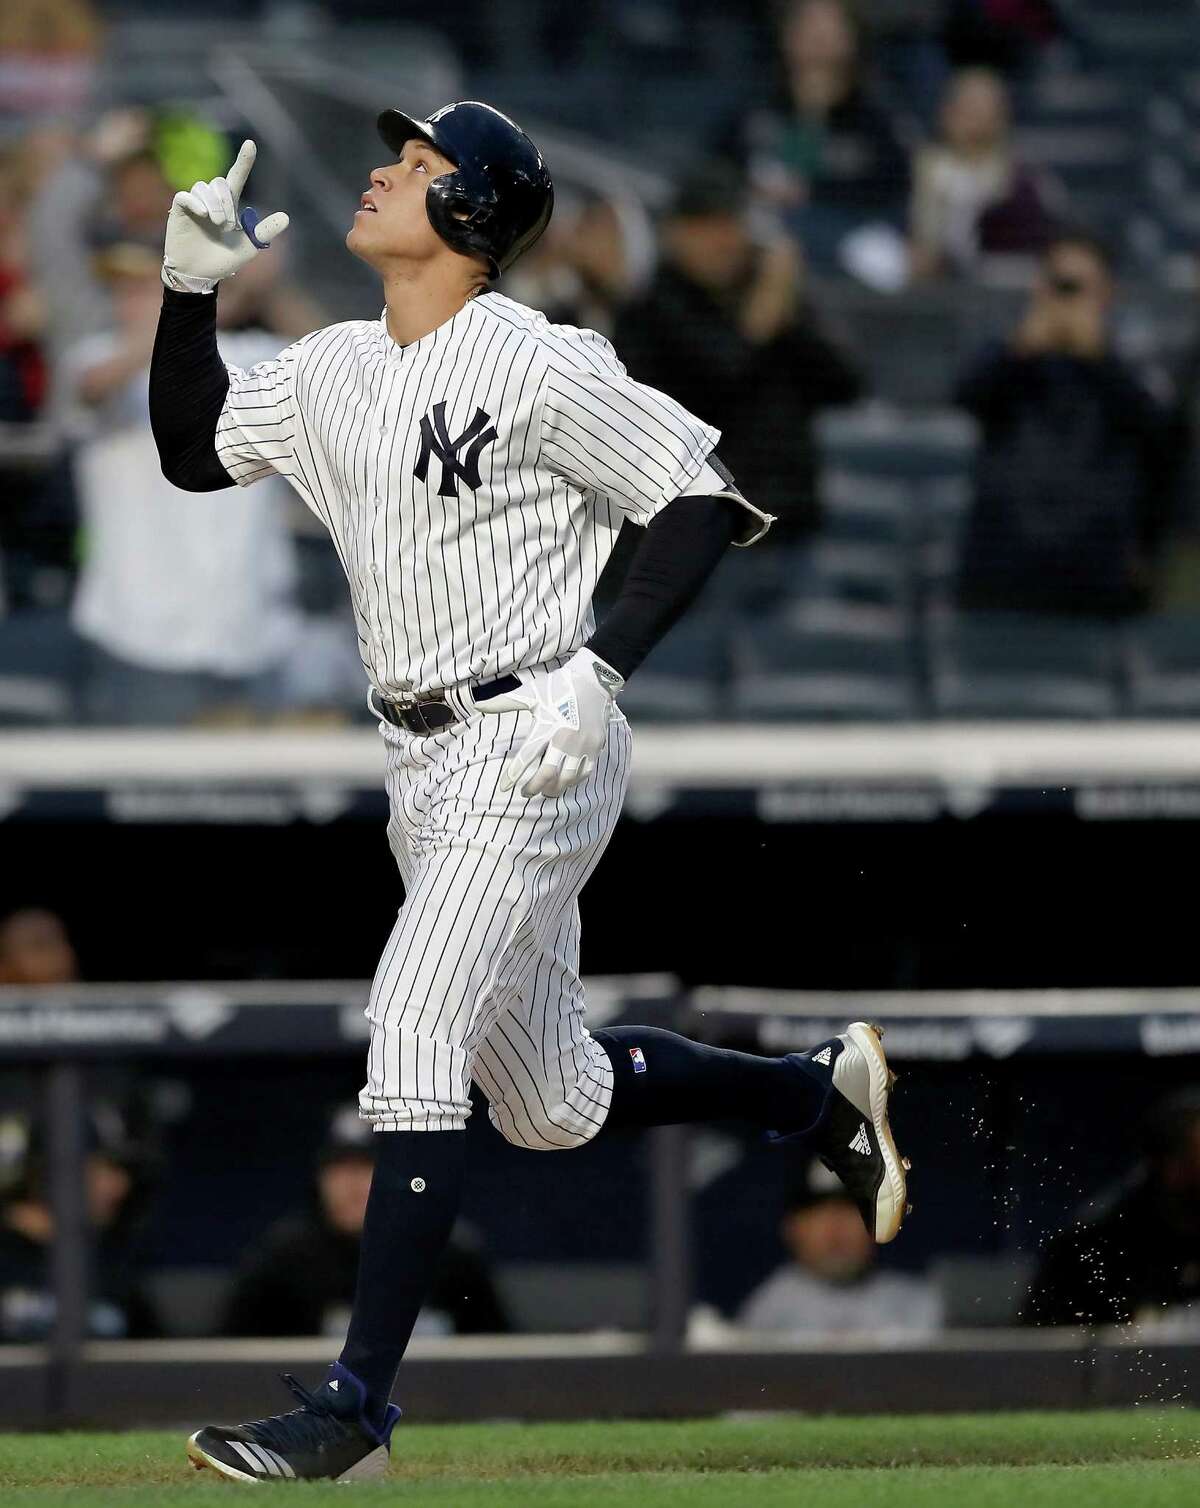 NEW YORK, NY - APRIL 16: Aaron Judge #99 of the New York Yankees celebrates his solo home run in the second inning against the Miami Marlins at Yankee Stadium on April 16, 2018 in the Bronx borough of New York City. (Photo by Elsa/Getty Images)